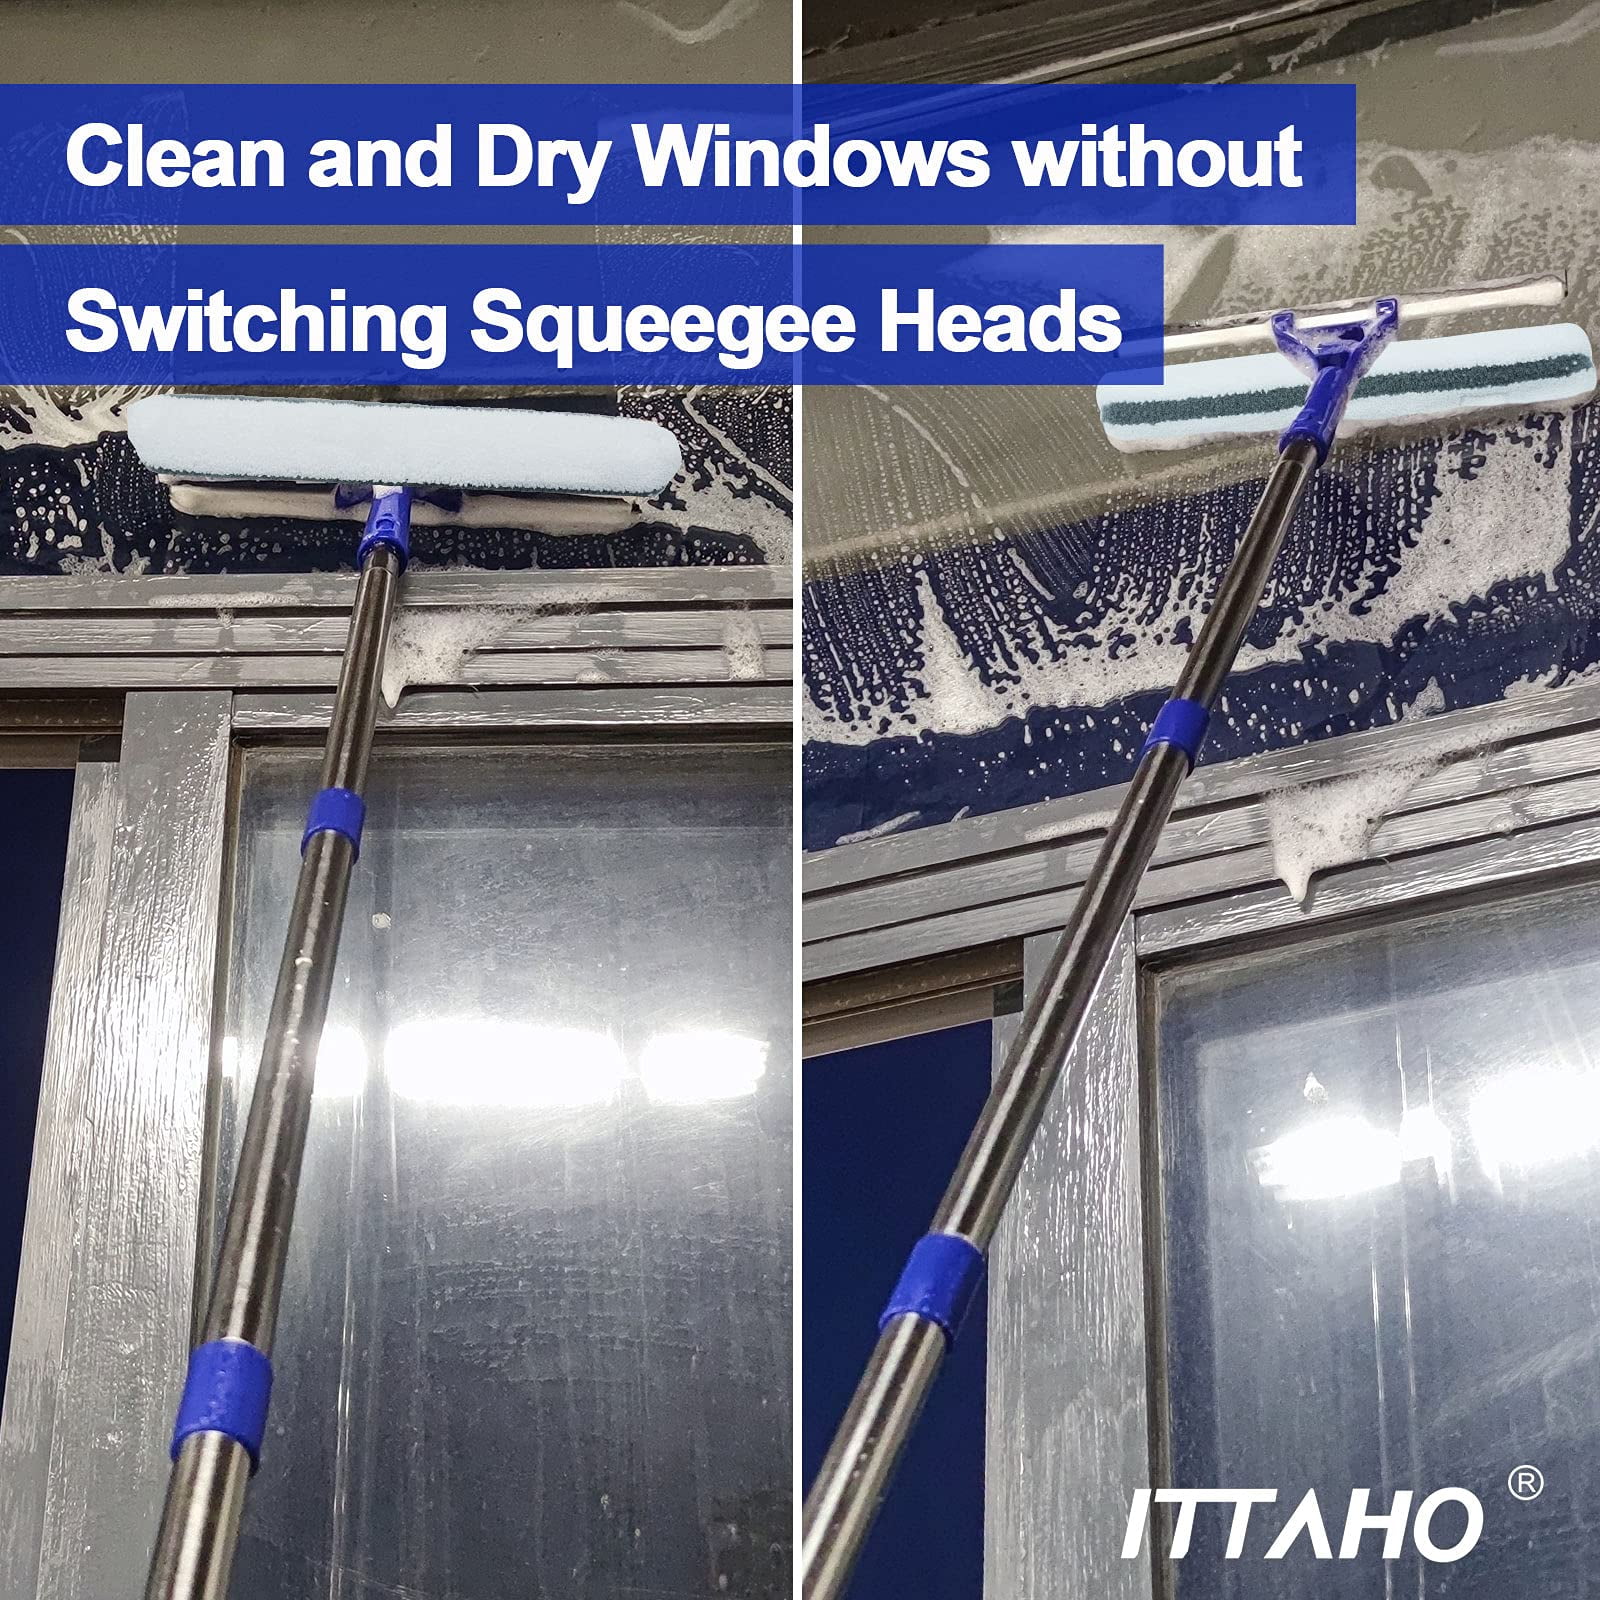 All Purpose Window Squeegee with 58 inch Long Handle, 2 Microfiber